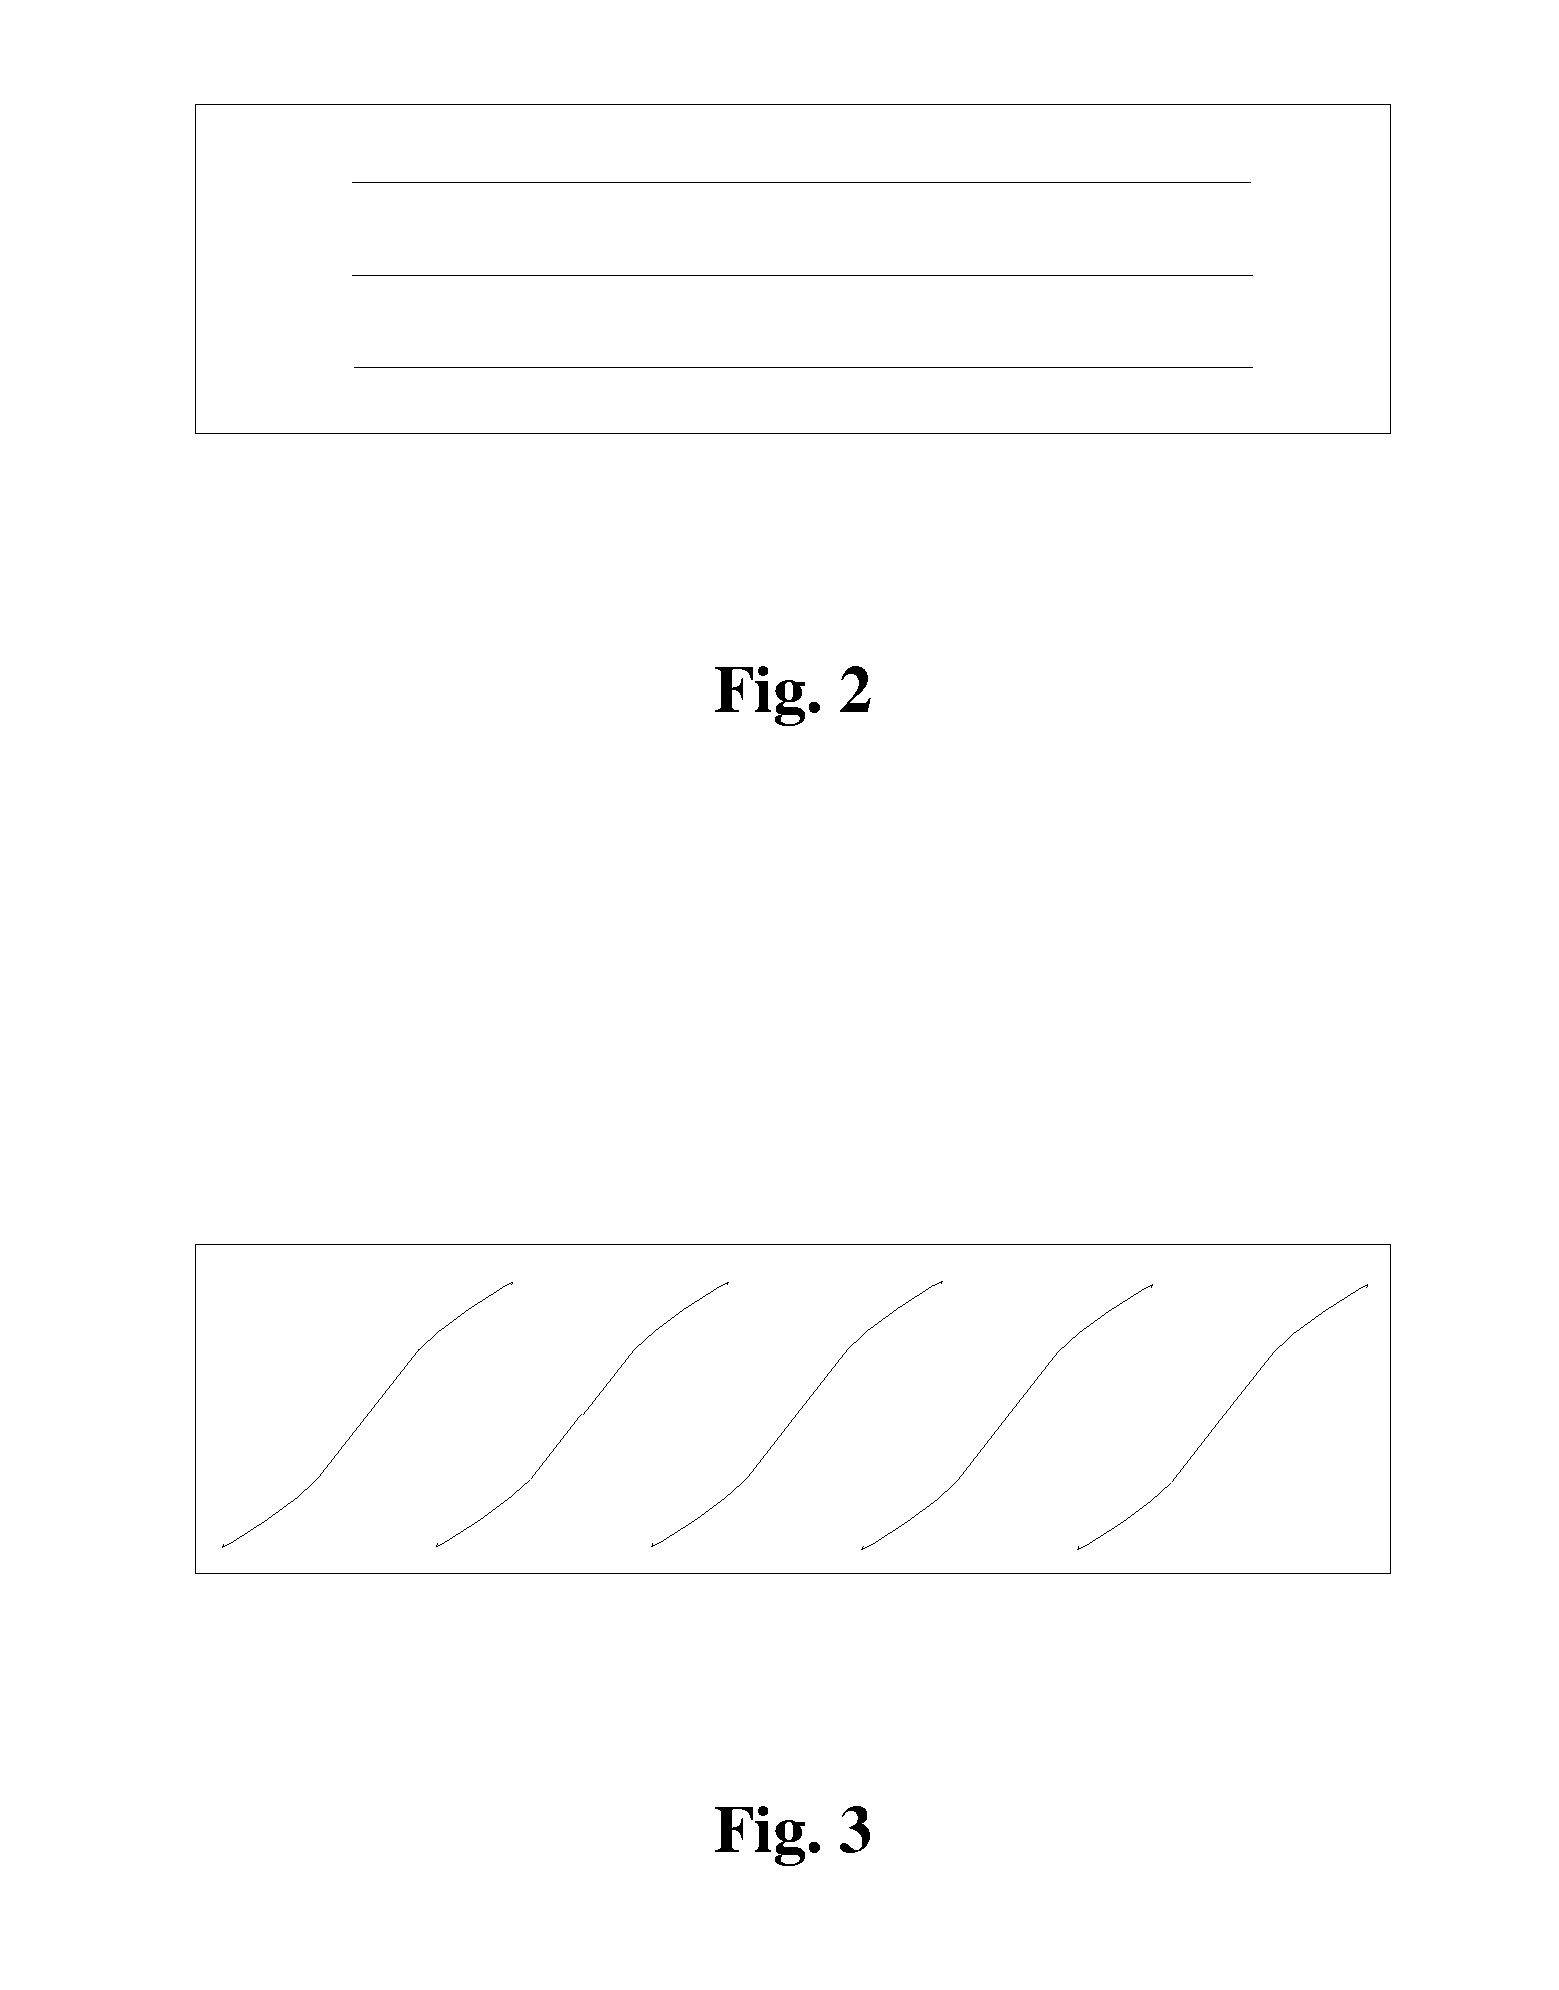 Device and method for molding bistable magnetic alloy wire